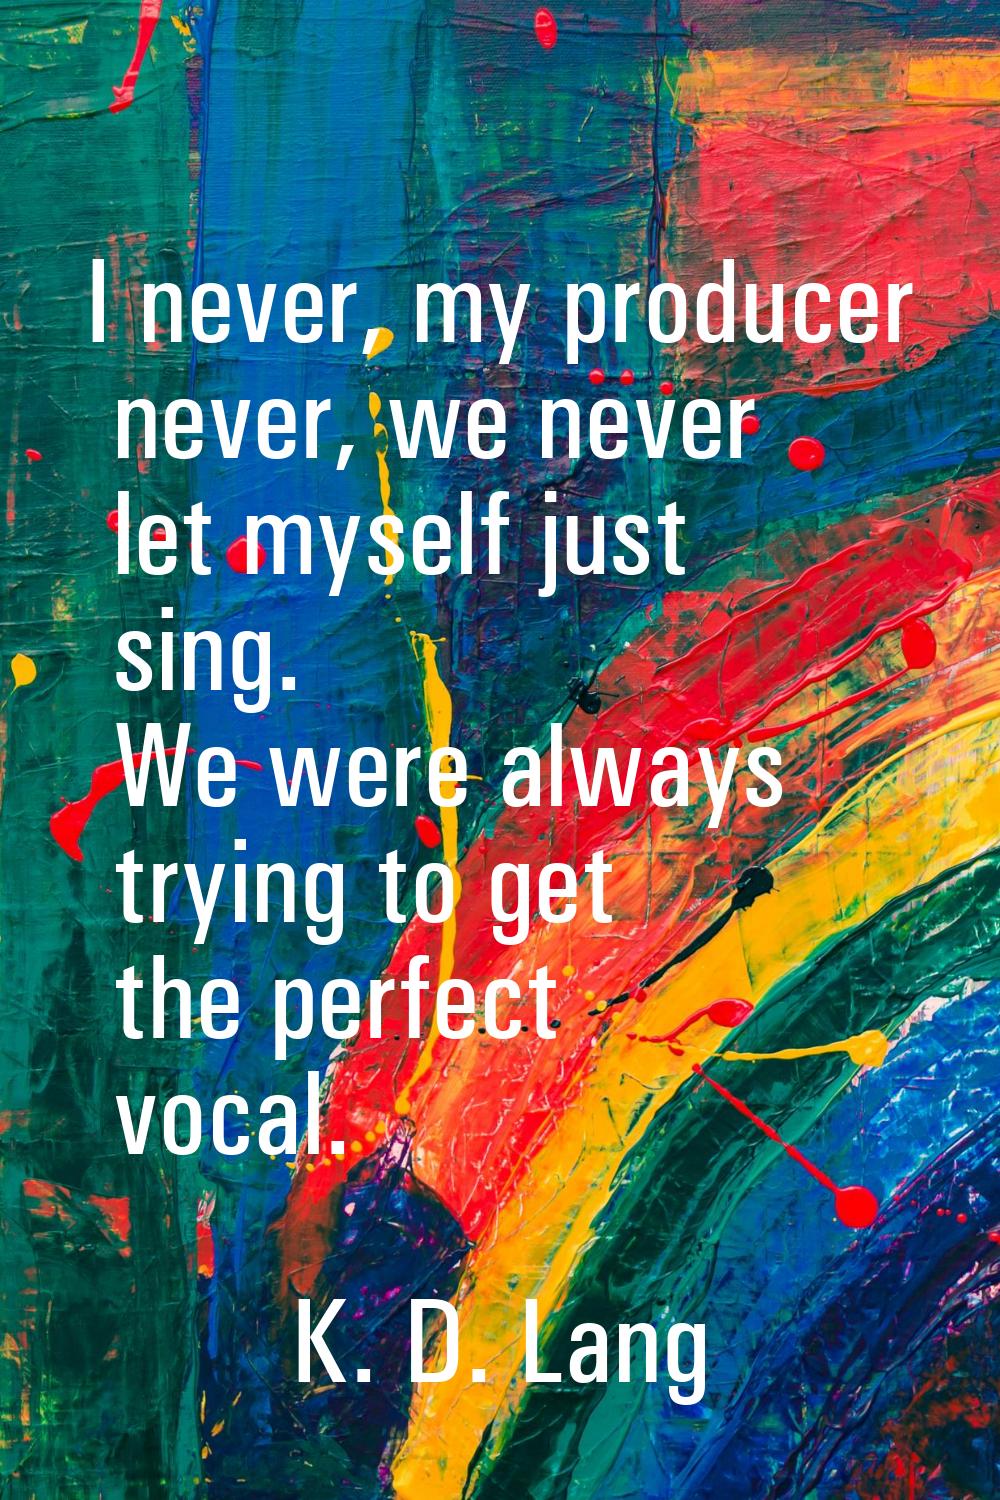 I never, my producer never, we never let myself just sing. We were always trying to get the perfect